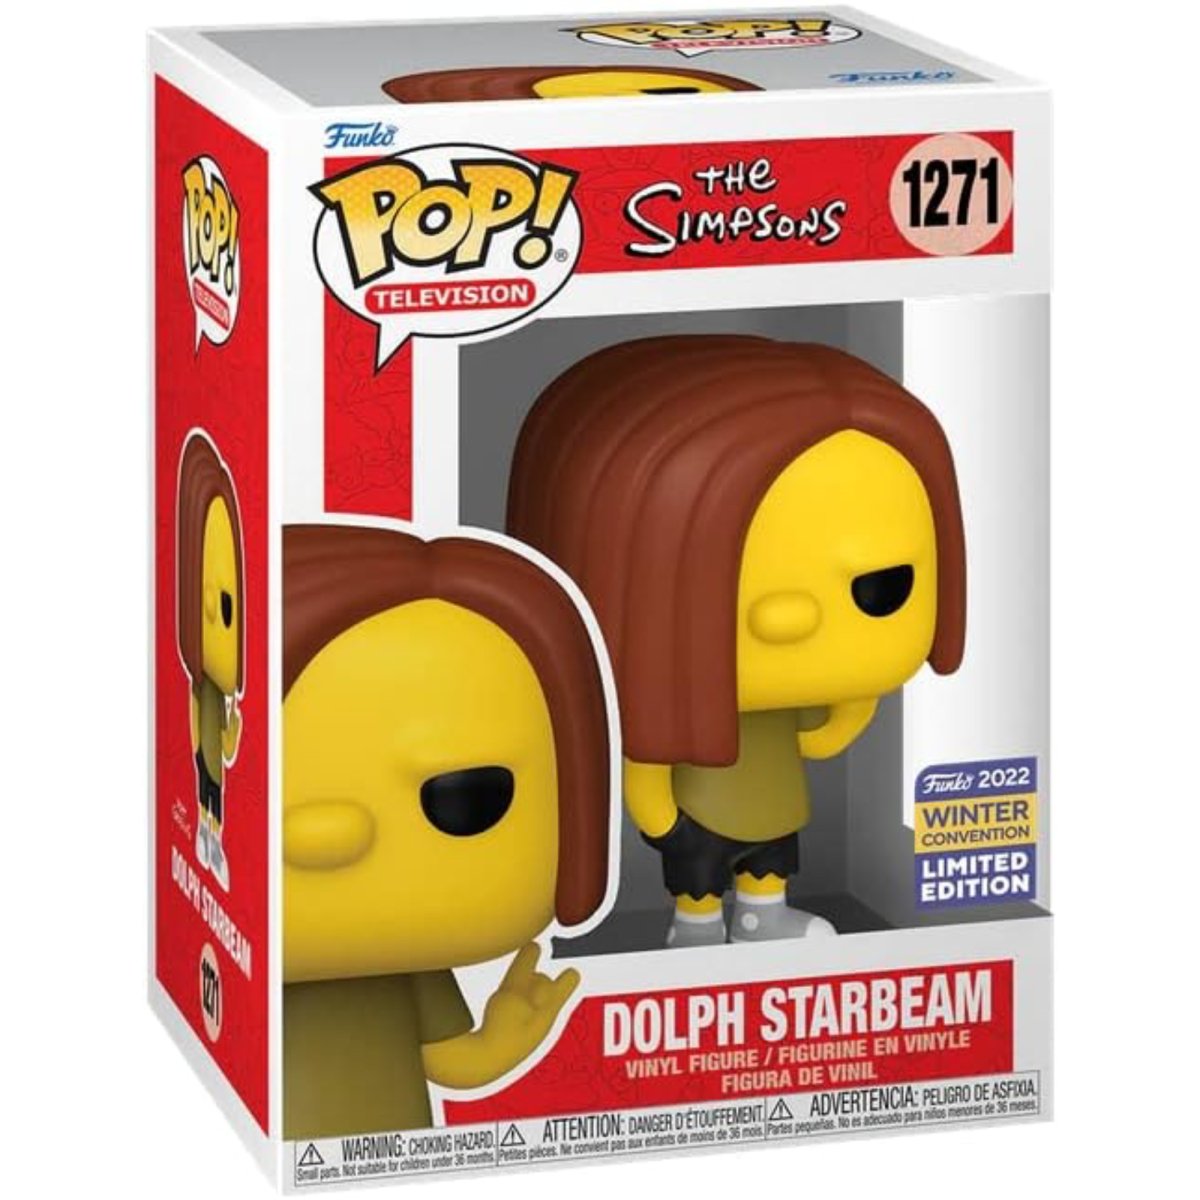 The Simpsons - Dolph Starbeam (2022 Winter Convention Limited Edition) #1271 - Funko Pop! Vinyl Animation - Persona Toys